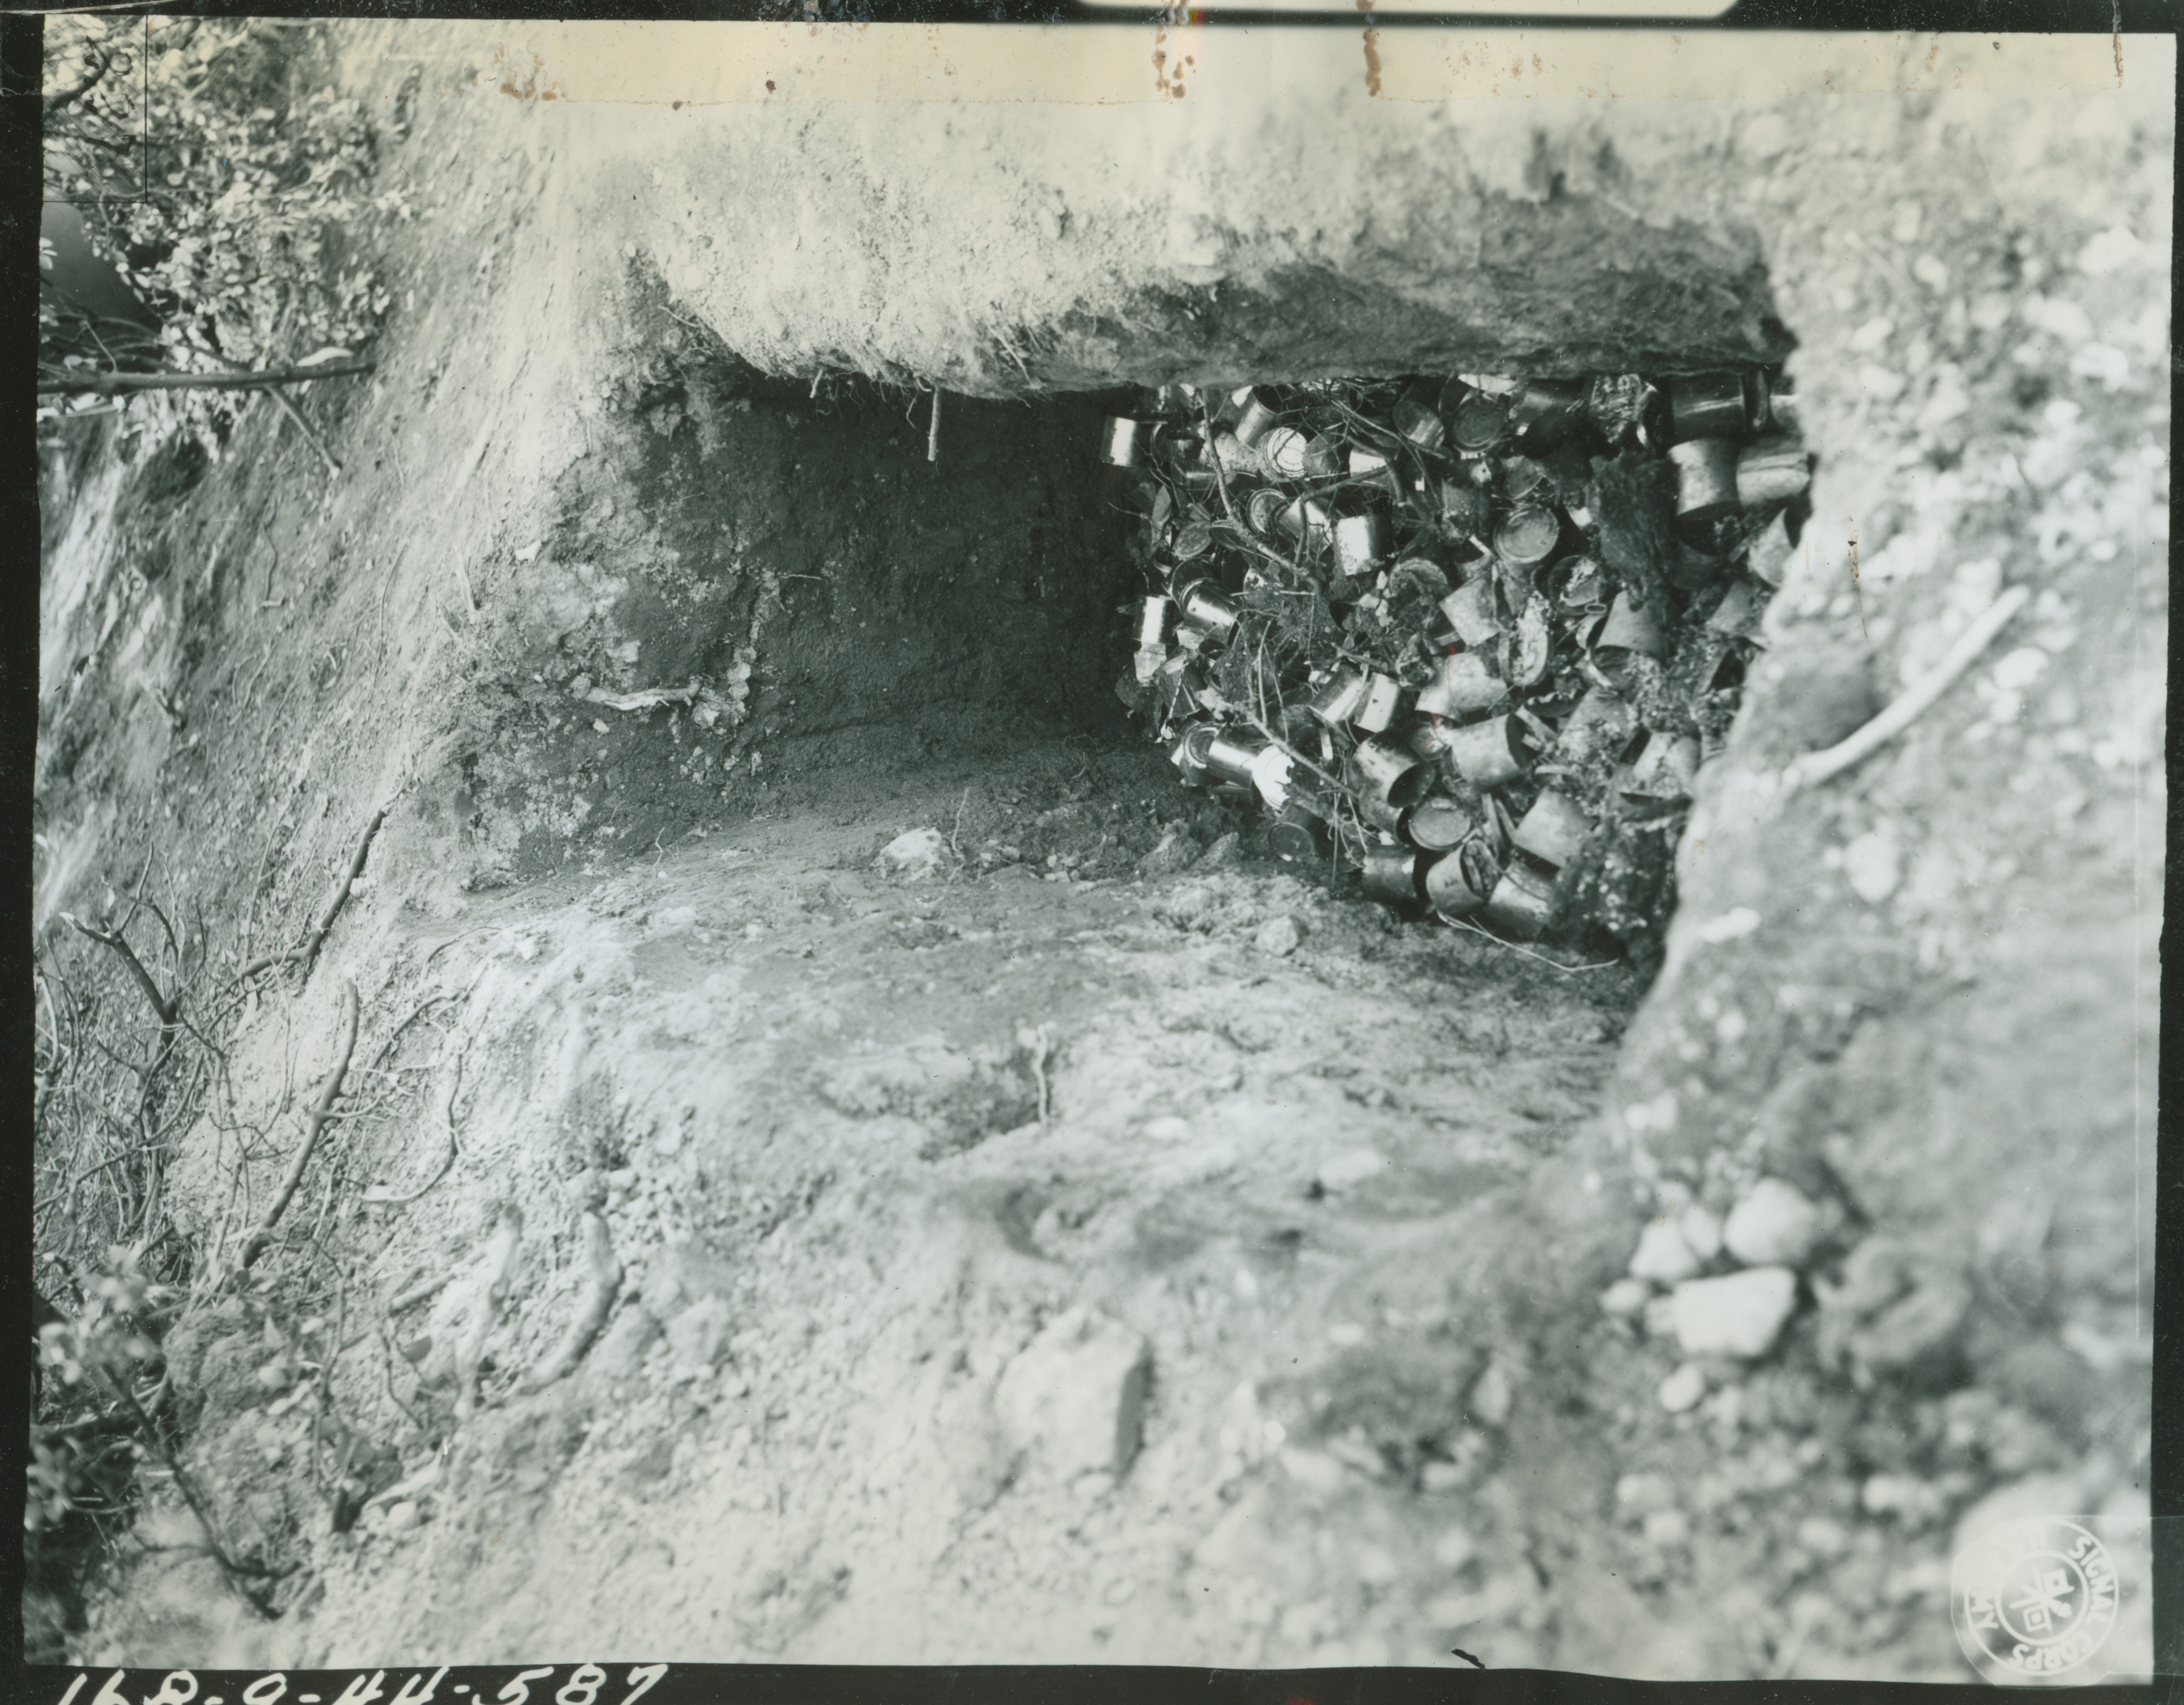 Oral HistoryImage Controlled VocabularyIMAGE TAGSA disposal pit for C Ration cans near bivouac areas at Hunter Liggett Military Reservation on 22 March 1944Your browser is out of date!